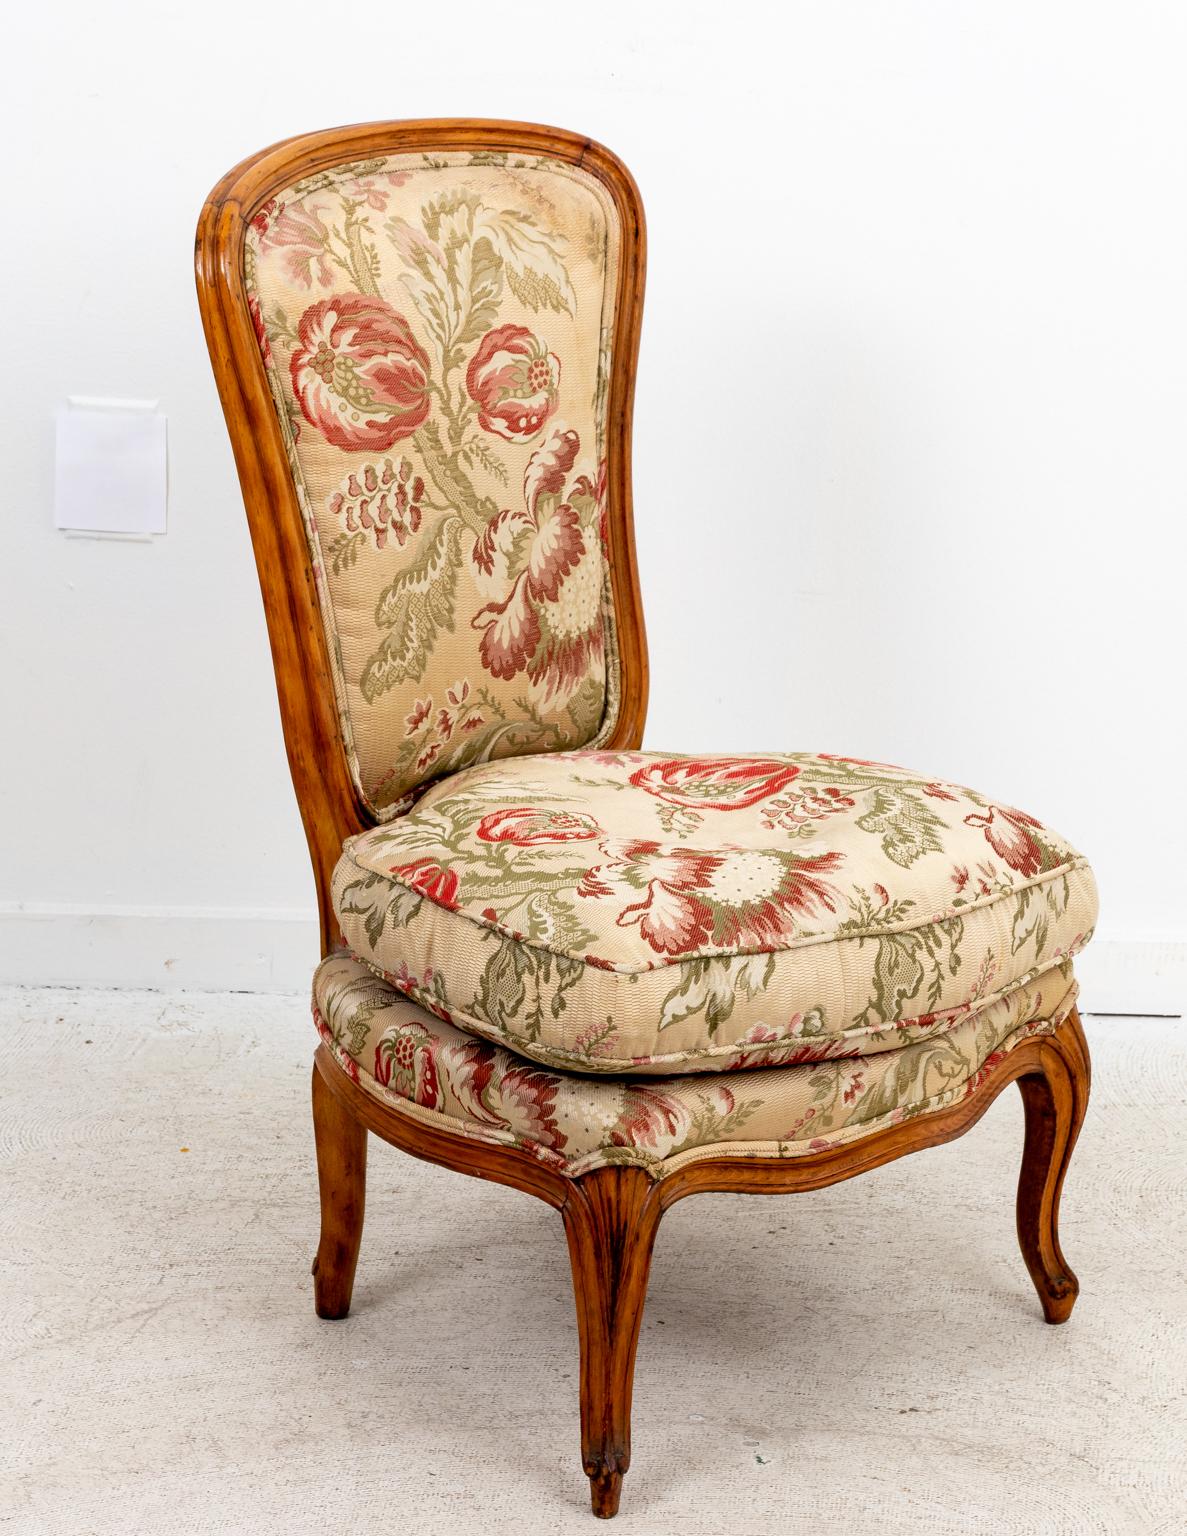 Upholstered slipper chair with quilted floral fabric and cabriole legs. Please note of wear consistent with age.